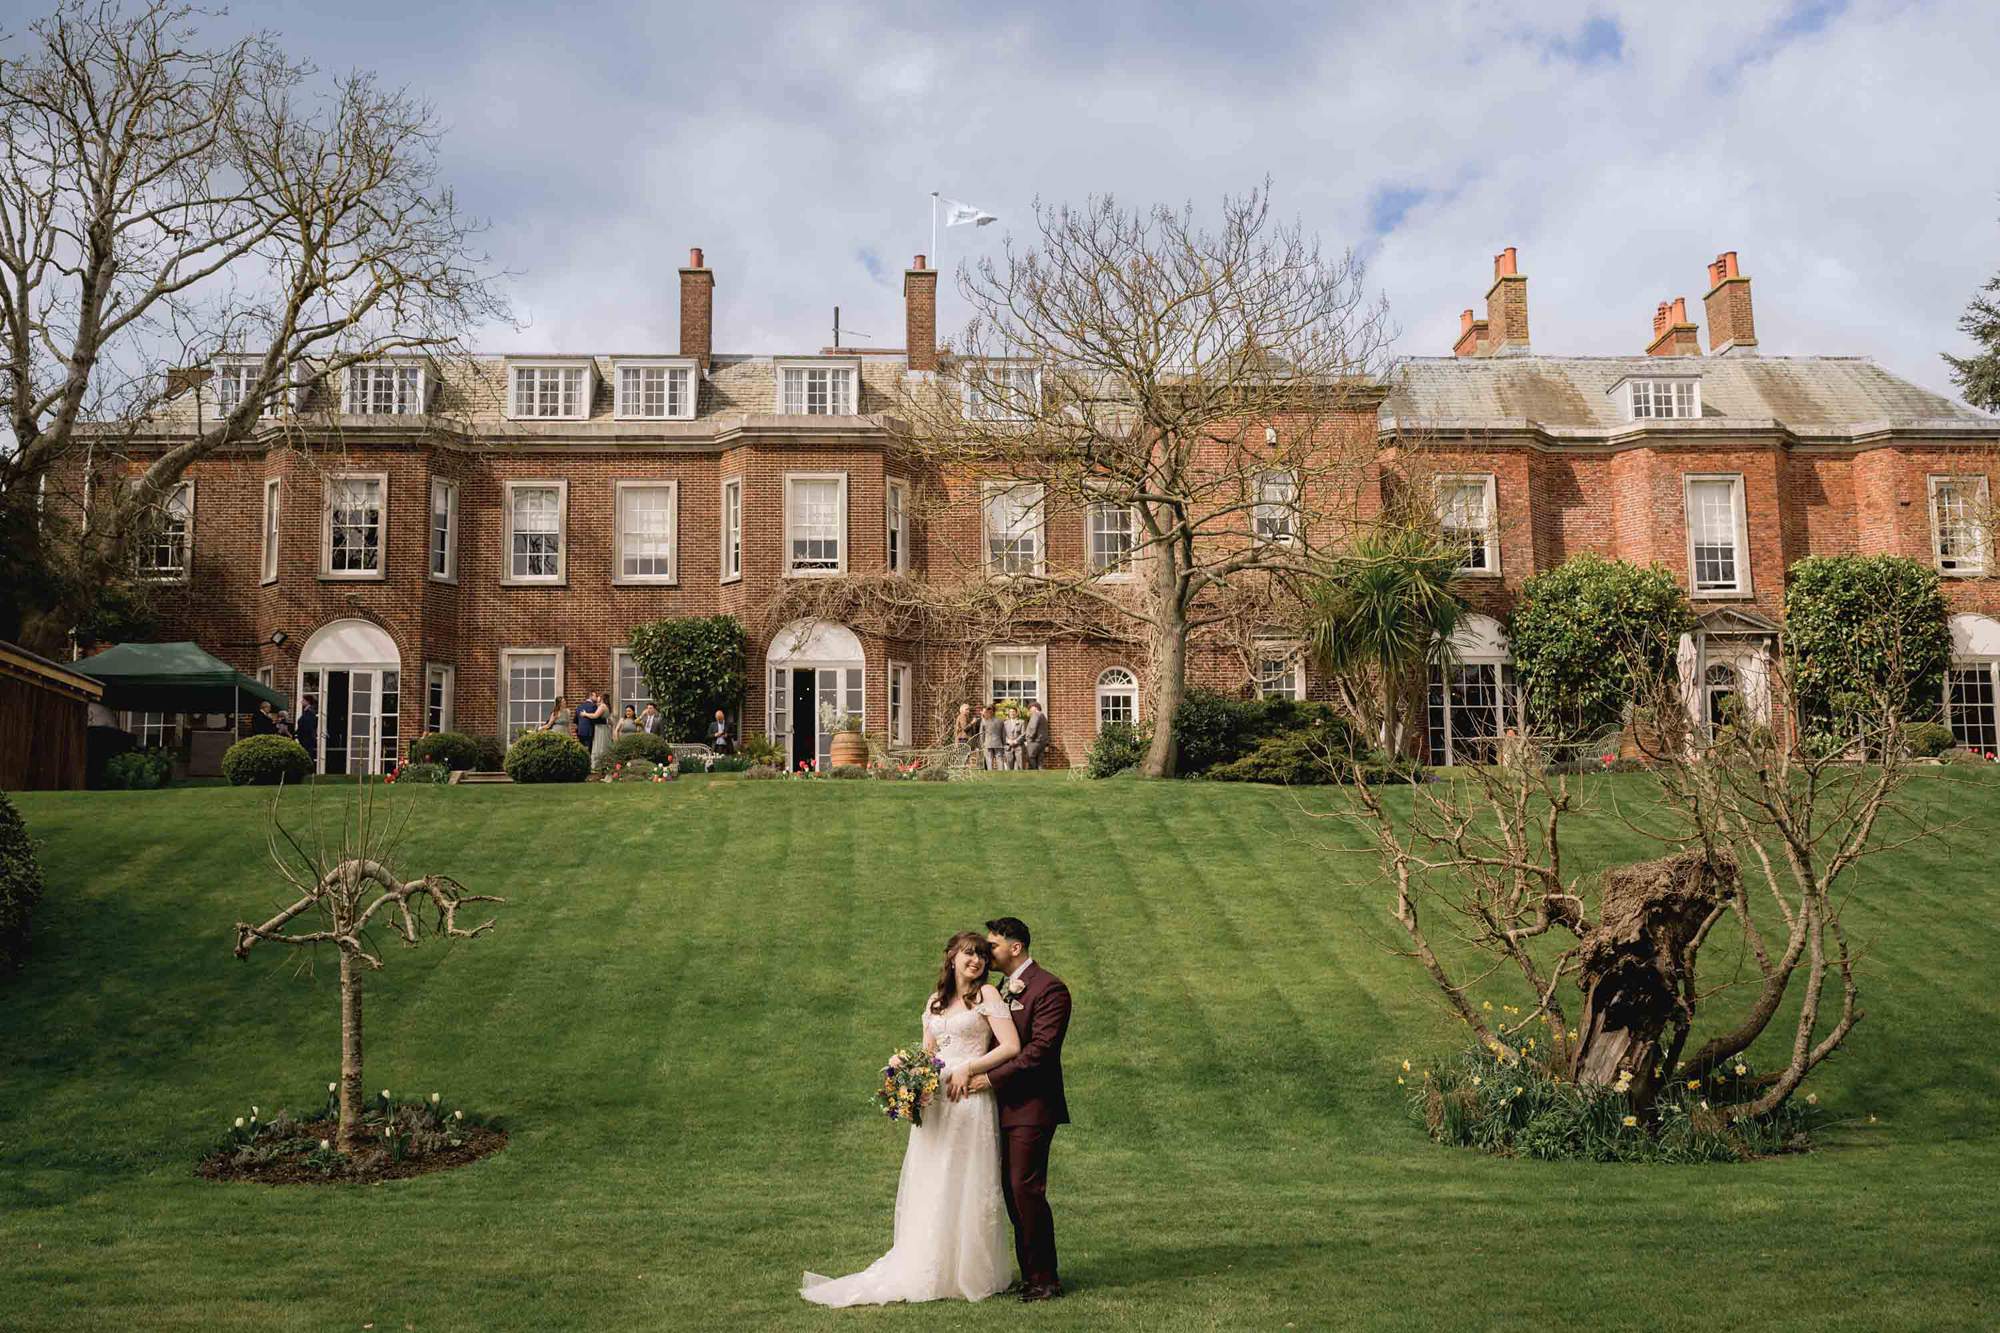 Bride and groom hug closely on their wedding day with Pelham House as the backdrop.